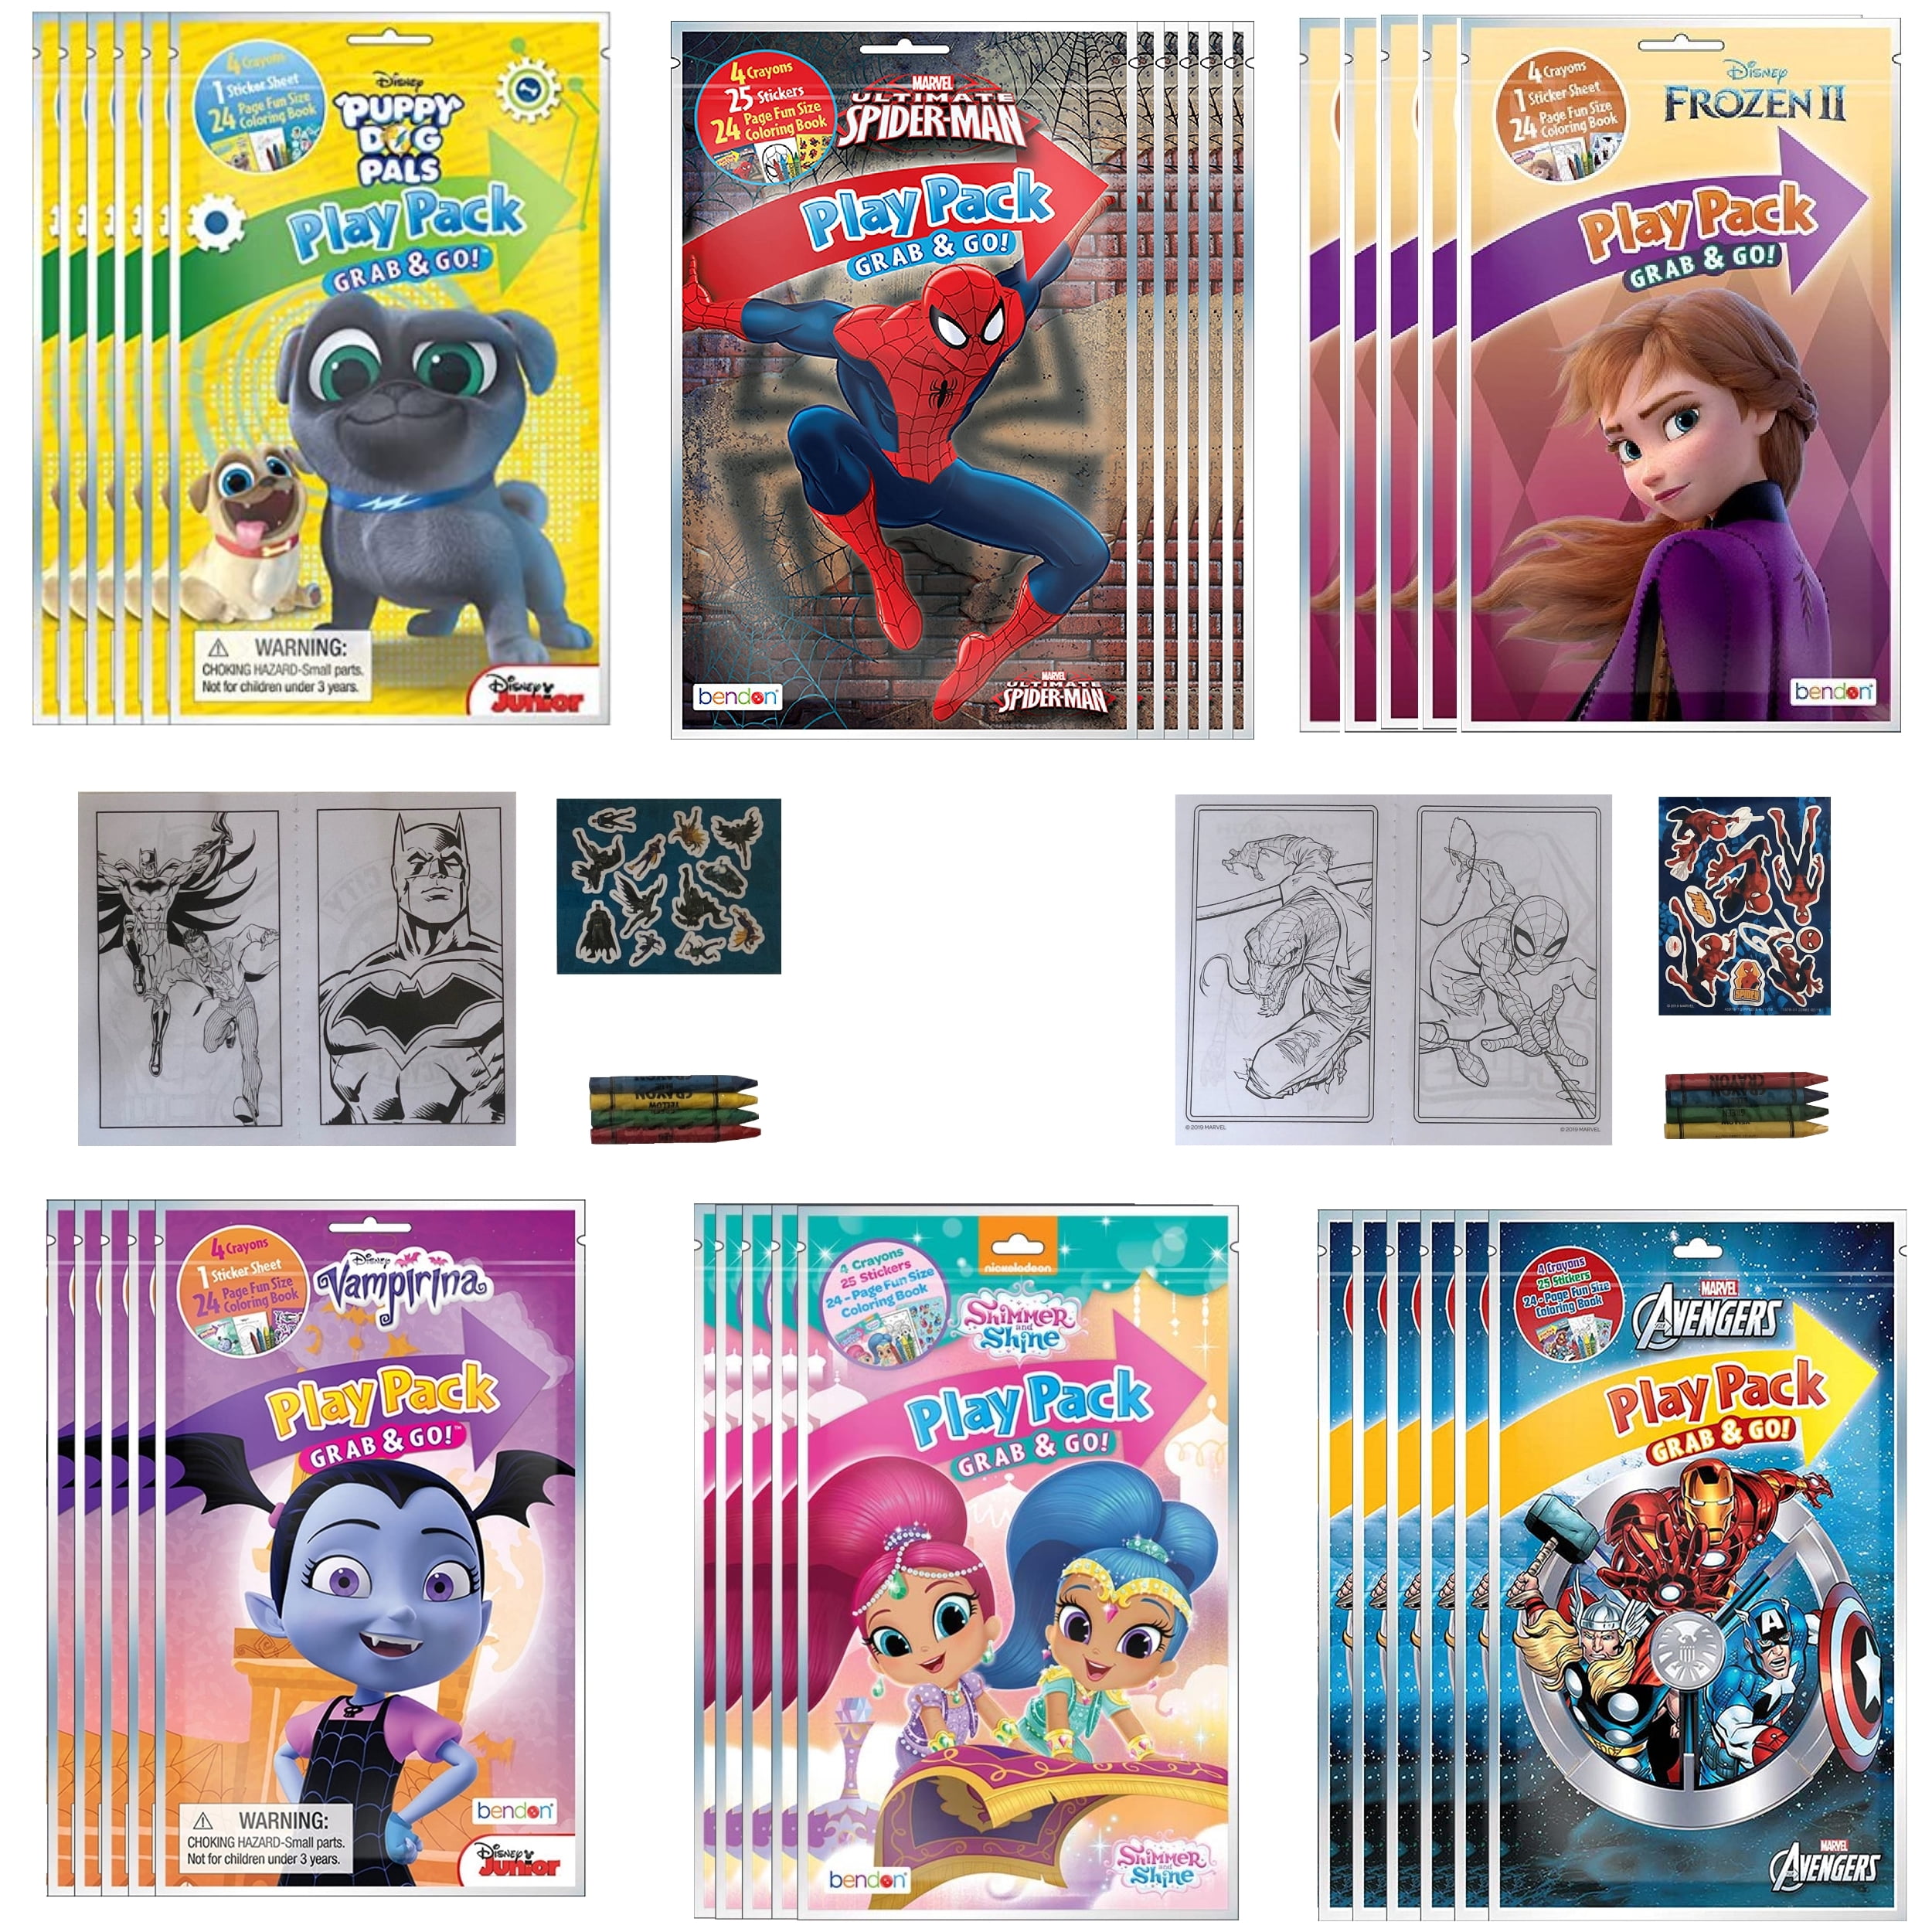  Nick Shop Paw Patrol Mini Party Favors Set for Kids - Bundle  with 24 Grab n Go Play Packs Coloring Pages, Stickers and More (Paw Birthday  Supplies) : Toys & Games